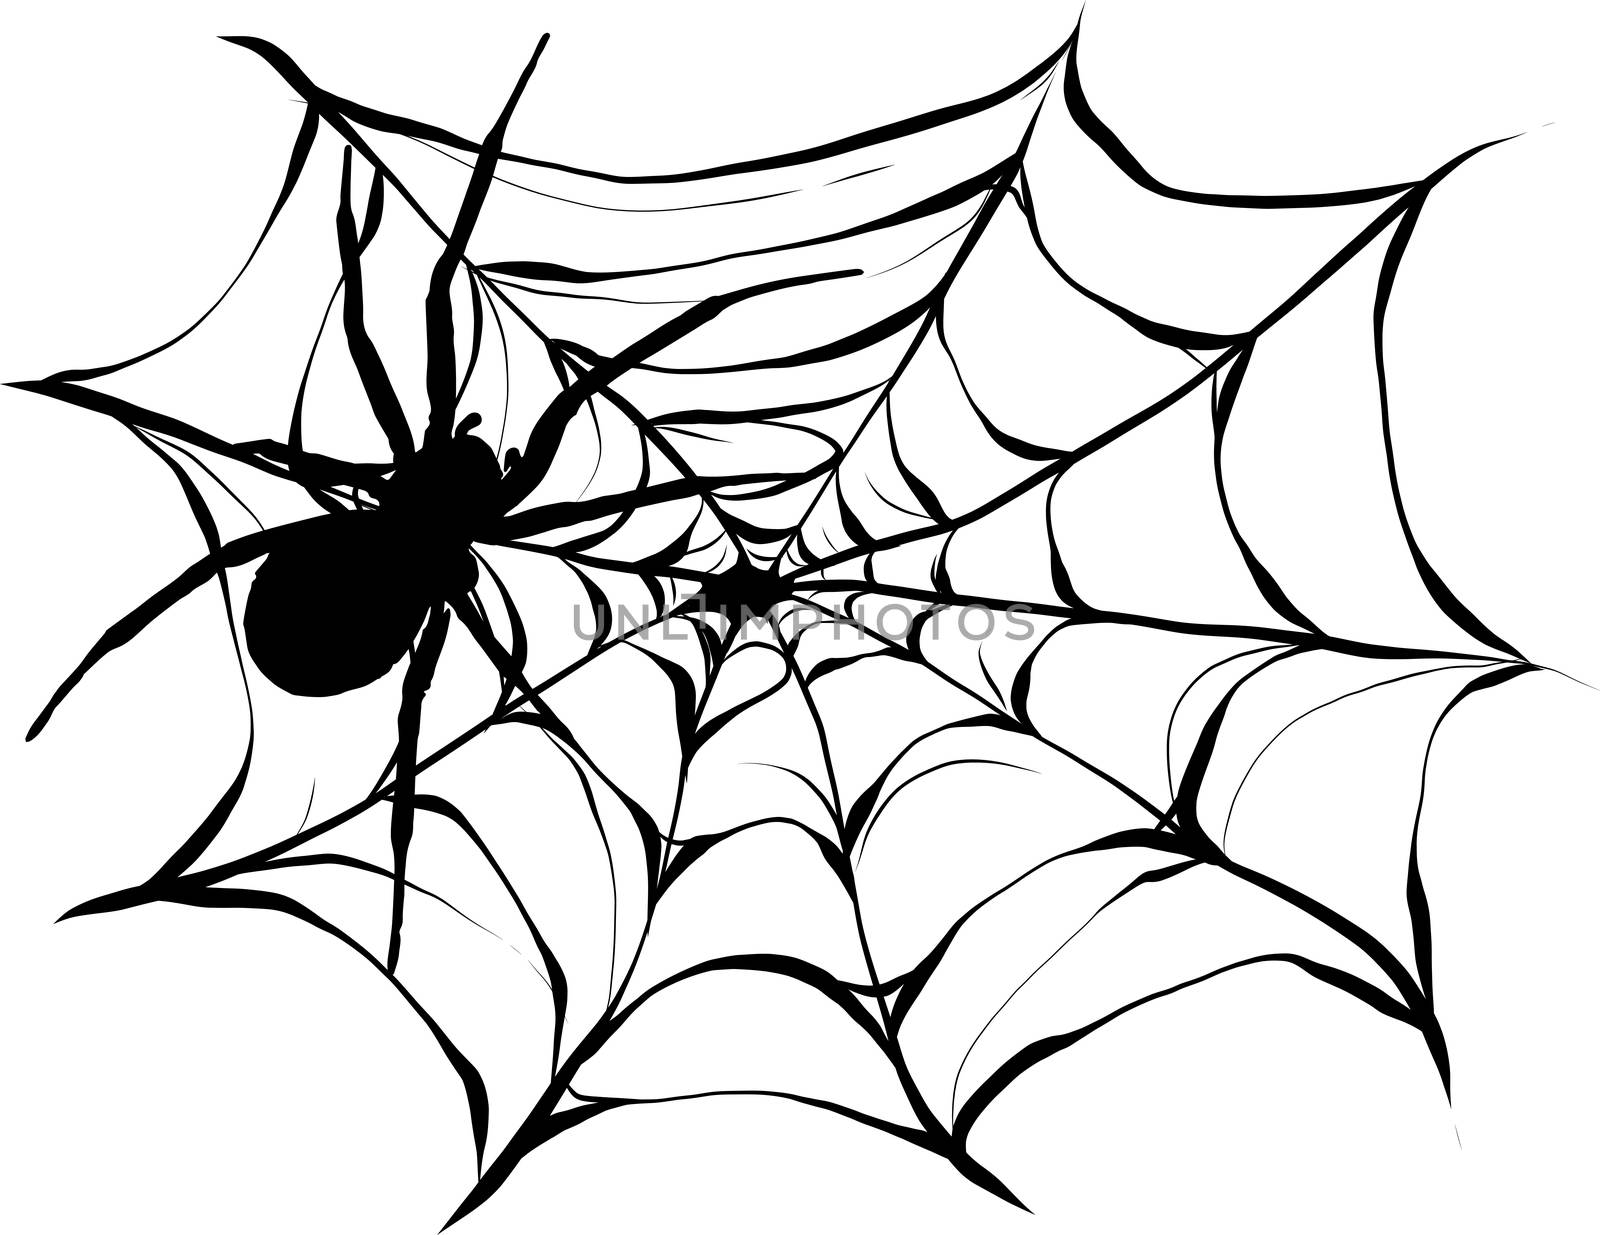 Black spider and torn web. Scary spiderweb of halloween symbol.